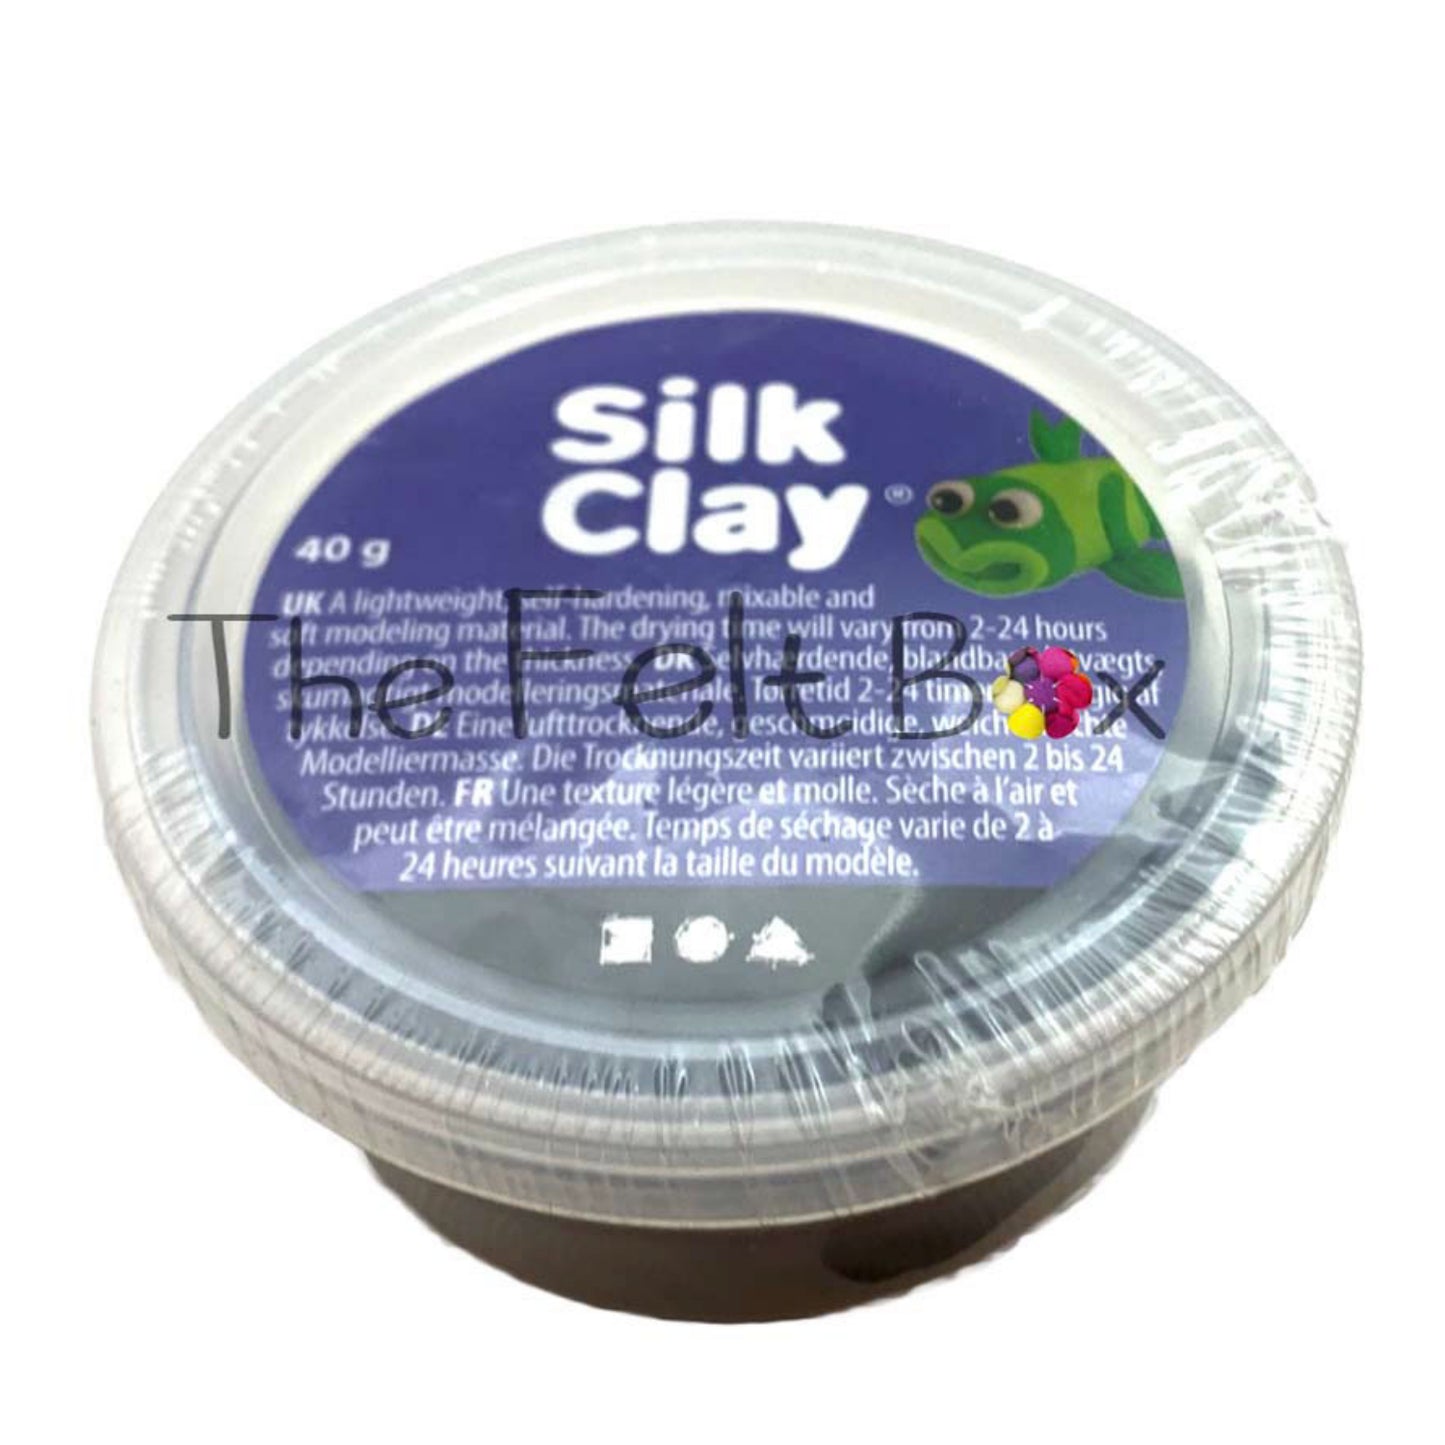 Silk Clay Modelling Medium for Noses, Beaks, Claws, Faces etc. For use in Needle Felting Sculptures, Black 40 g